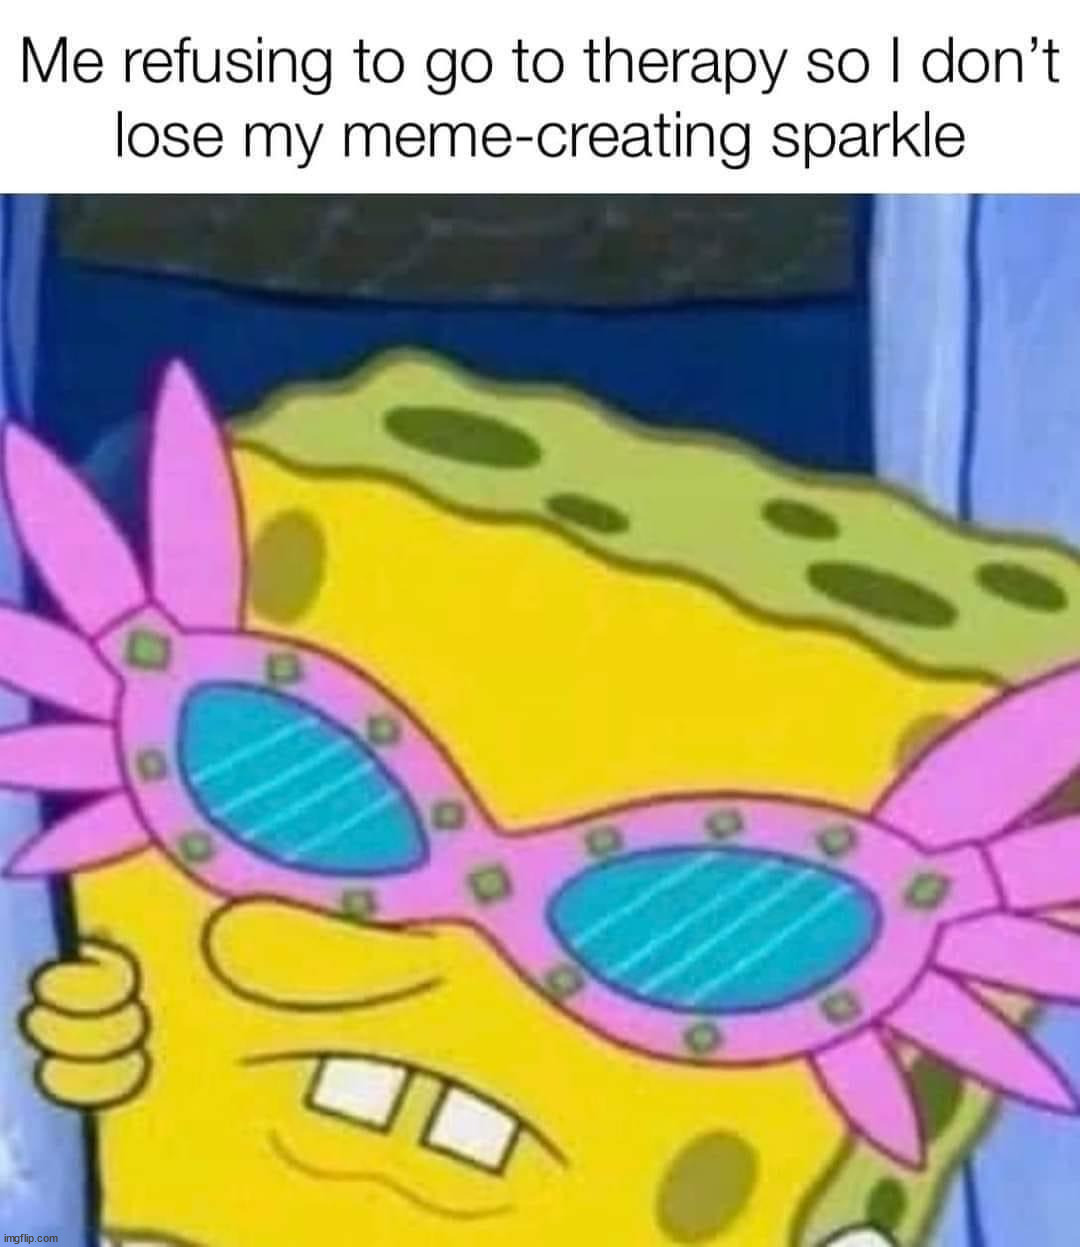 The sacrifices I make for memes | image tagged in who_am_i | made w/ Imgflip meme maker